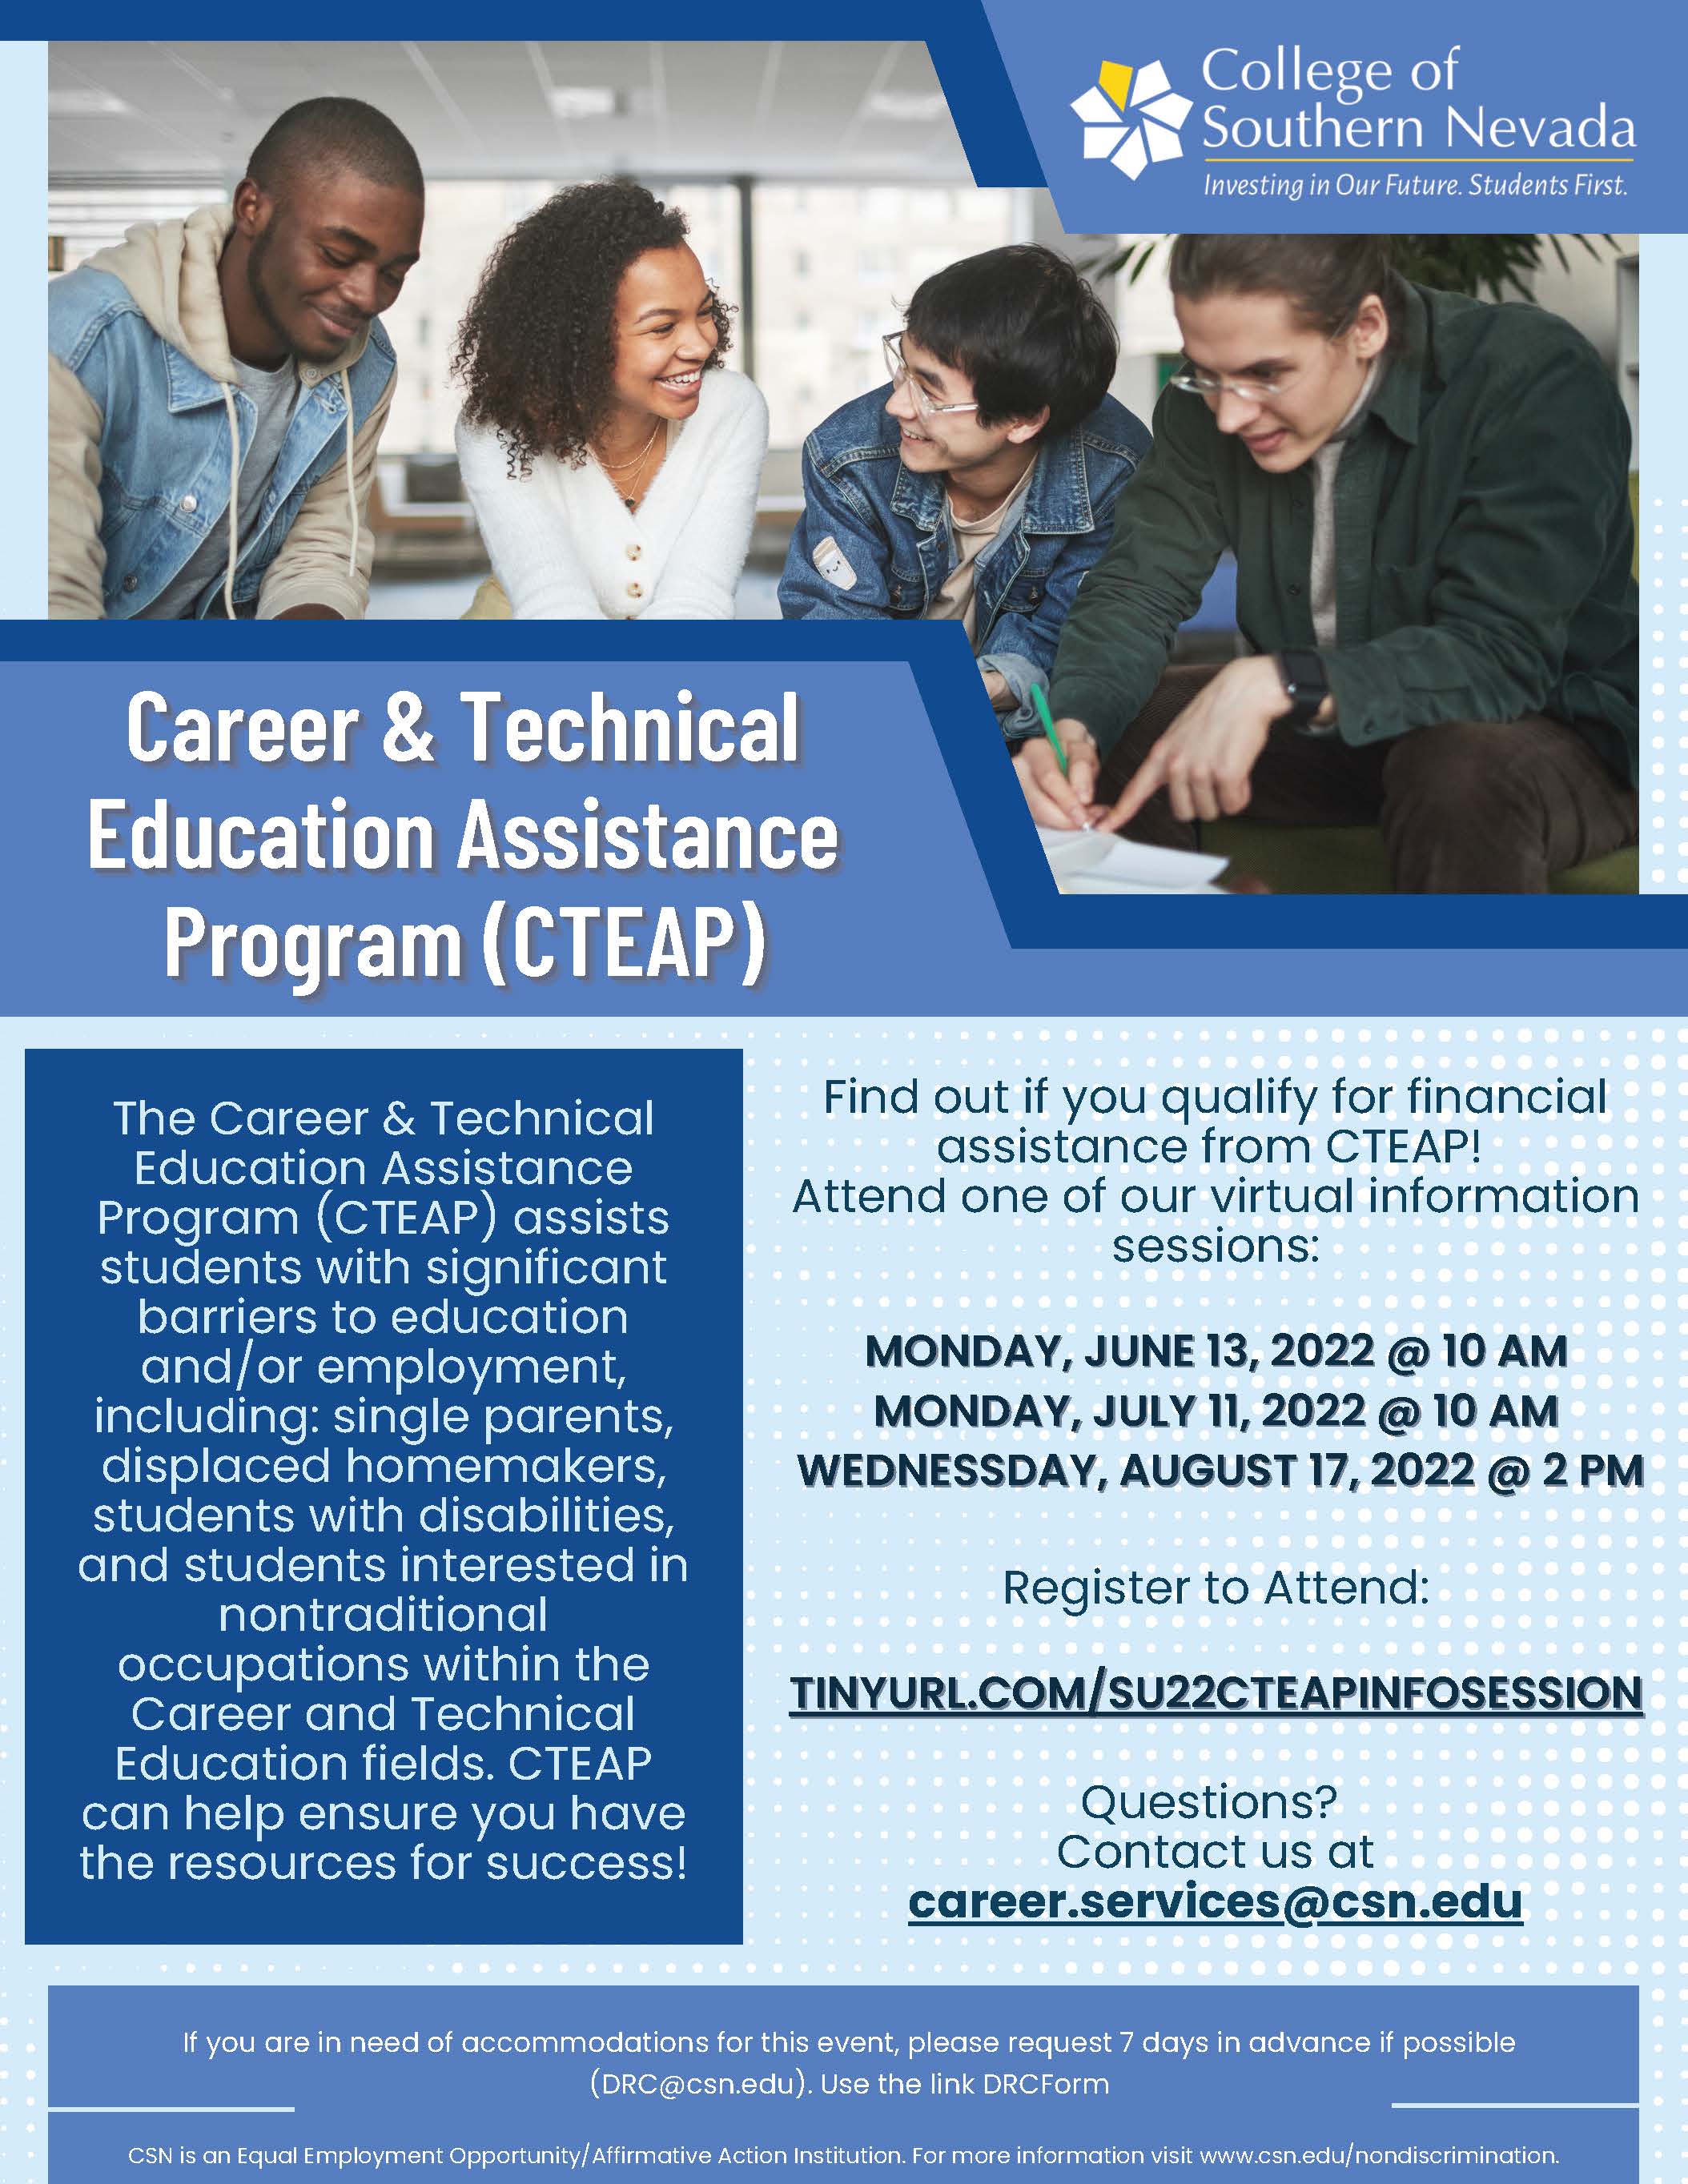 Events flyer highlighting CTEAP summer information sessions 